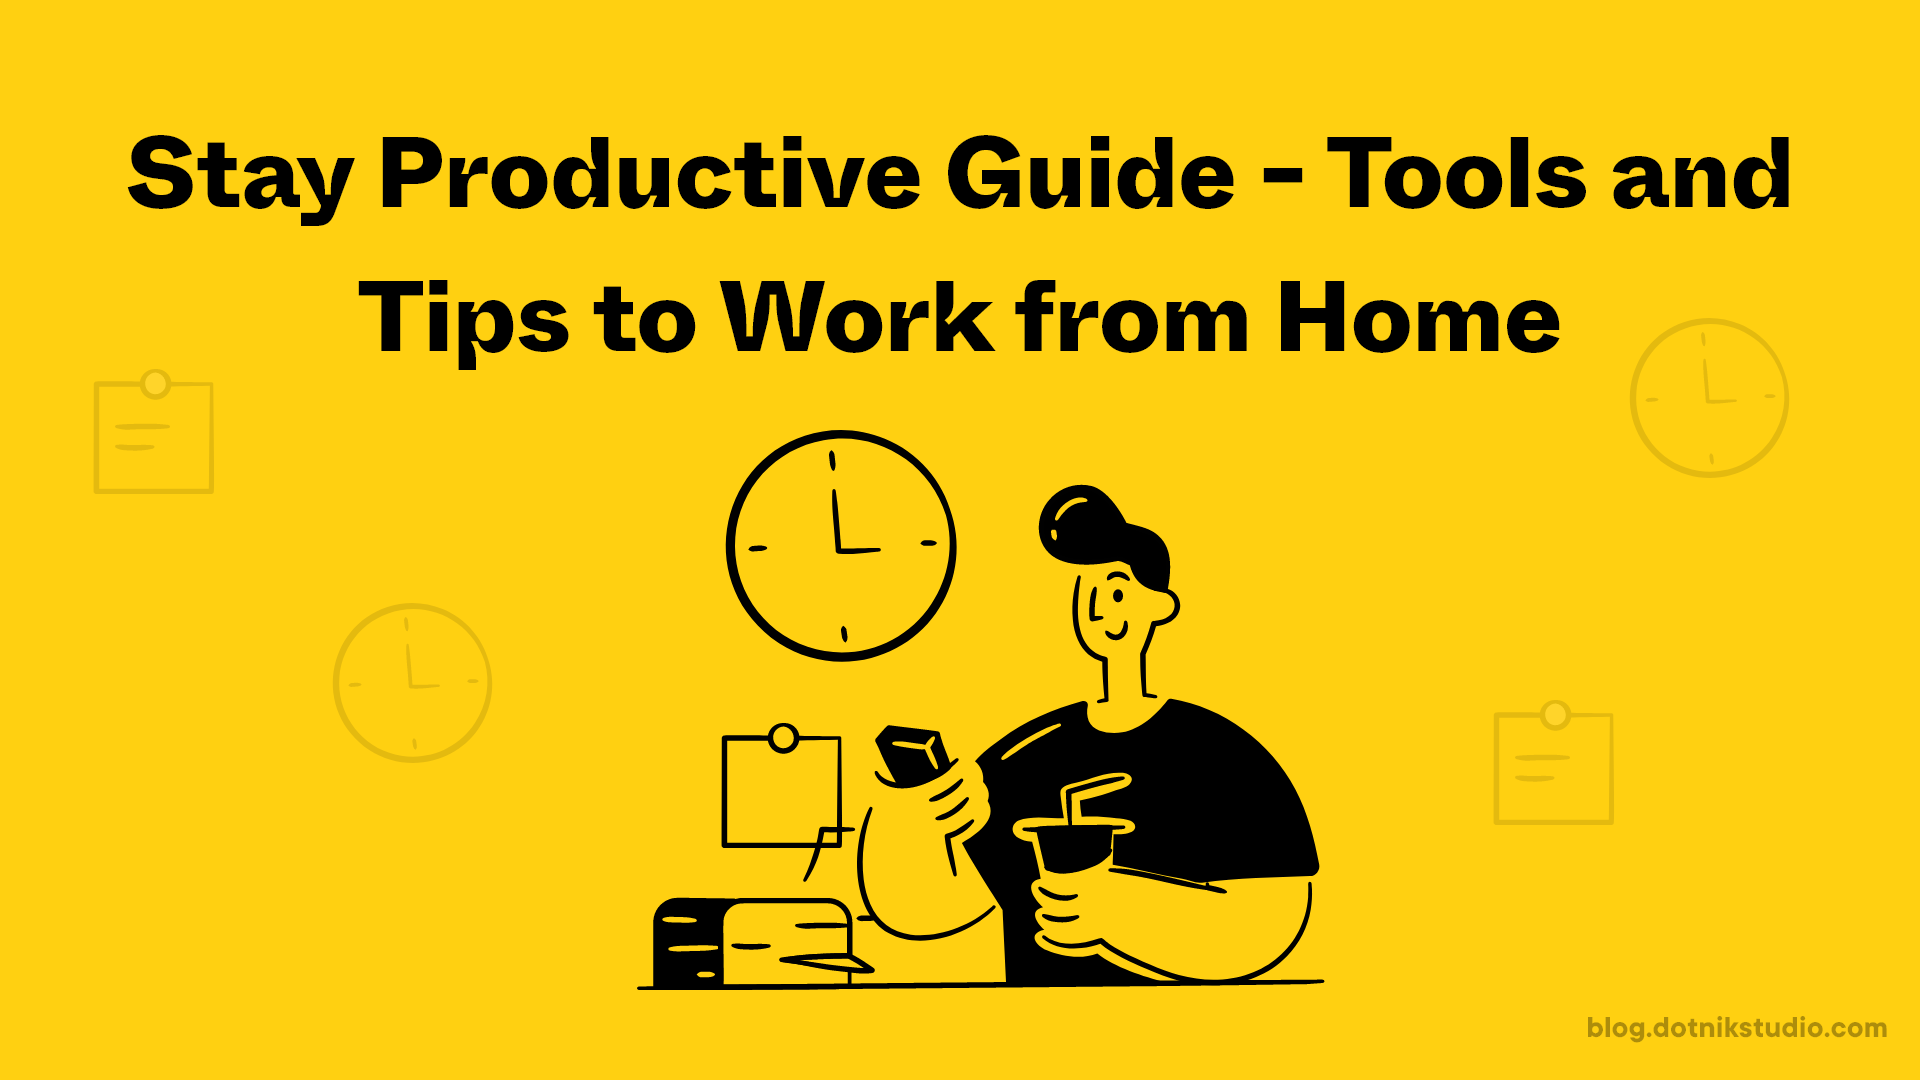 Stay Productive Guide - Tools and Tips to Work from Home